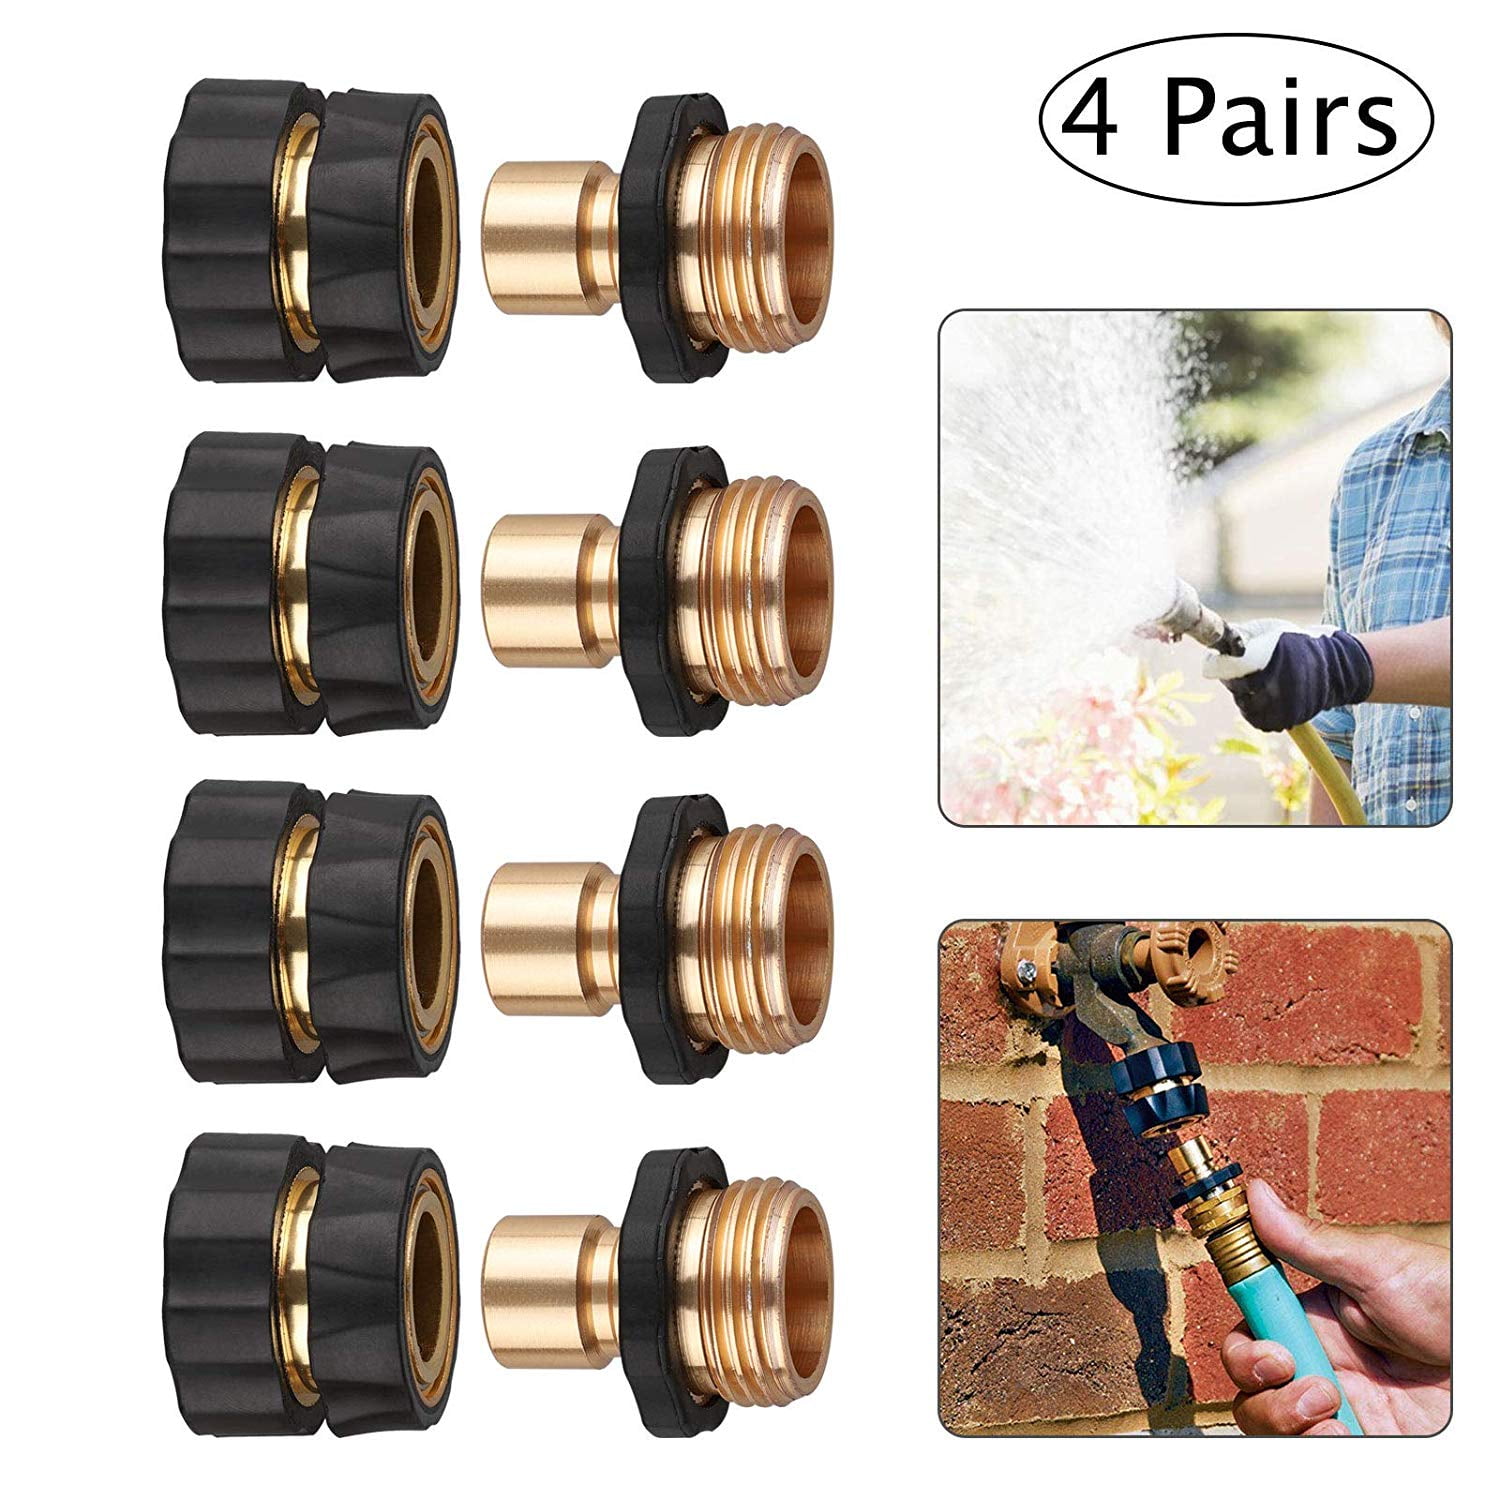 1 Pairs Universal Garden Hose Quick Connect Set Brass Hose Tap Adapter Connector 